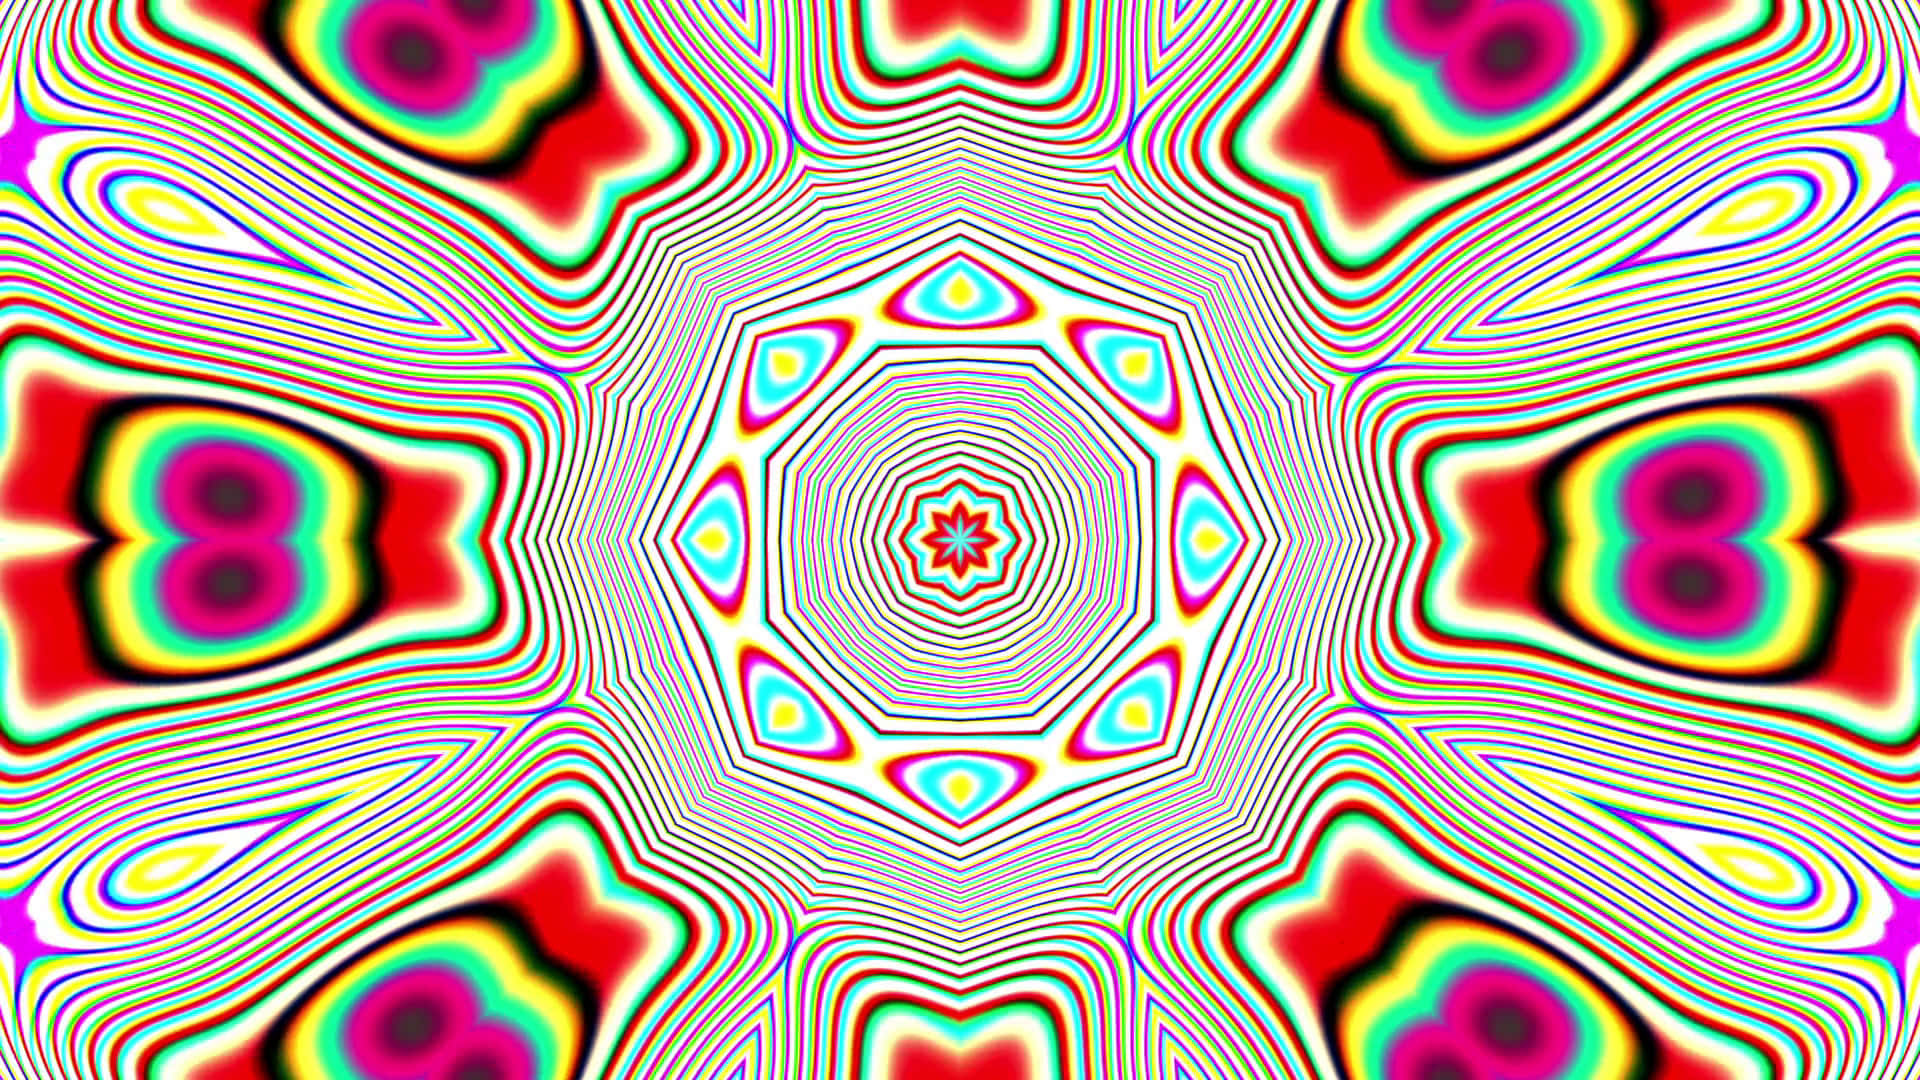 A Colorful Psychedelic Pattern With A Circular Shape